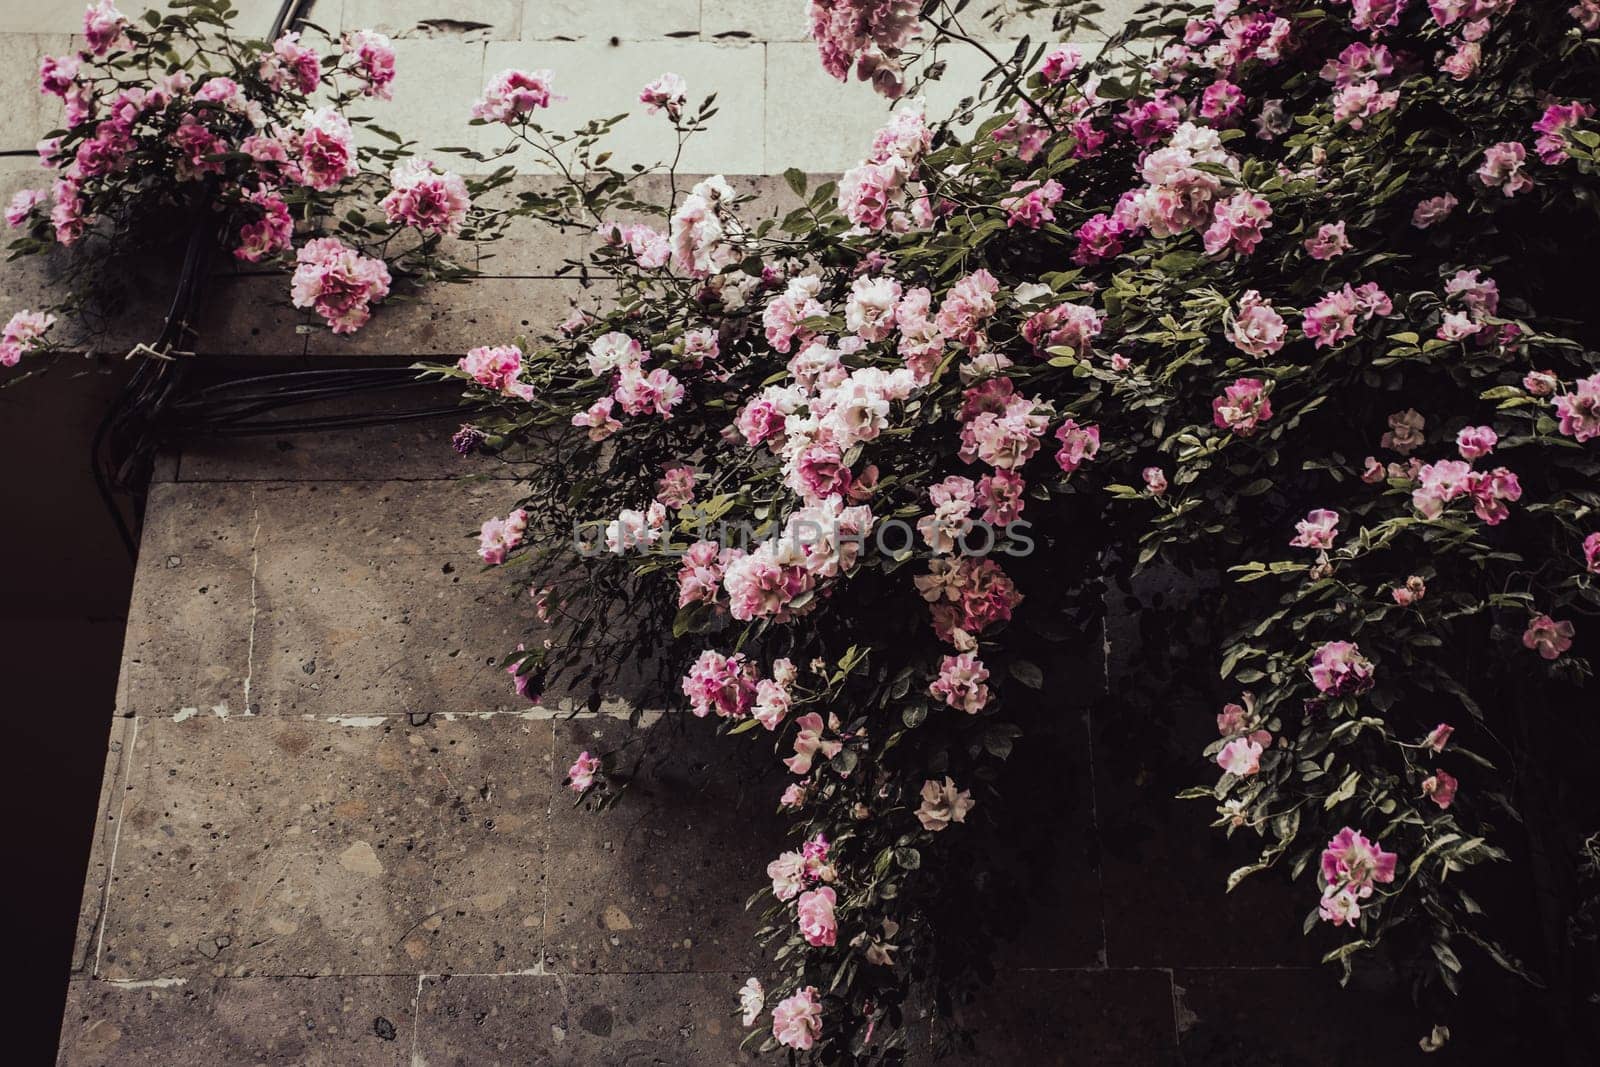 Shrub of pink roses on the wall concept photo. Rose flower buds. by _Nataly_Nati_